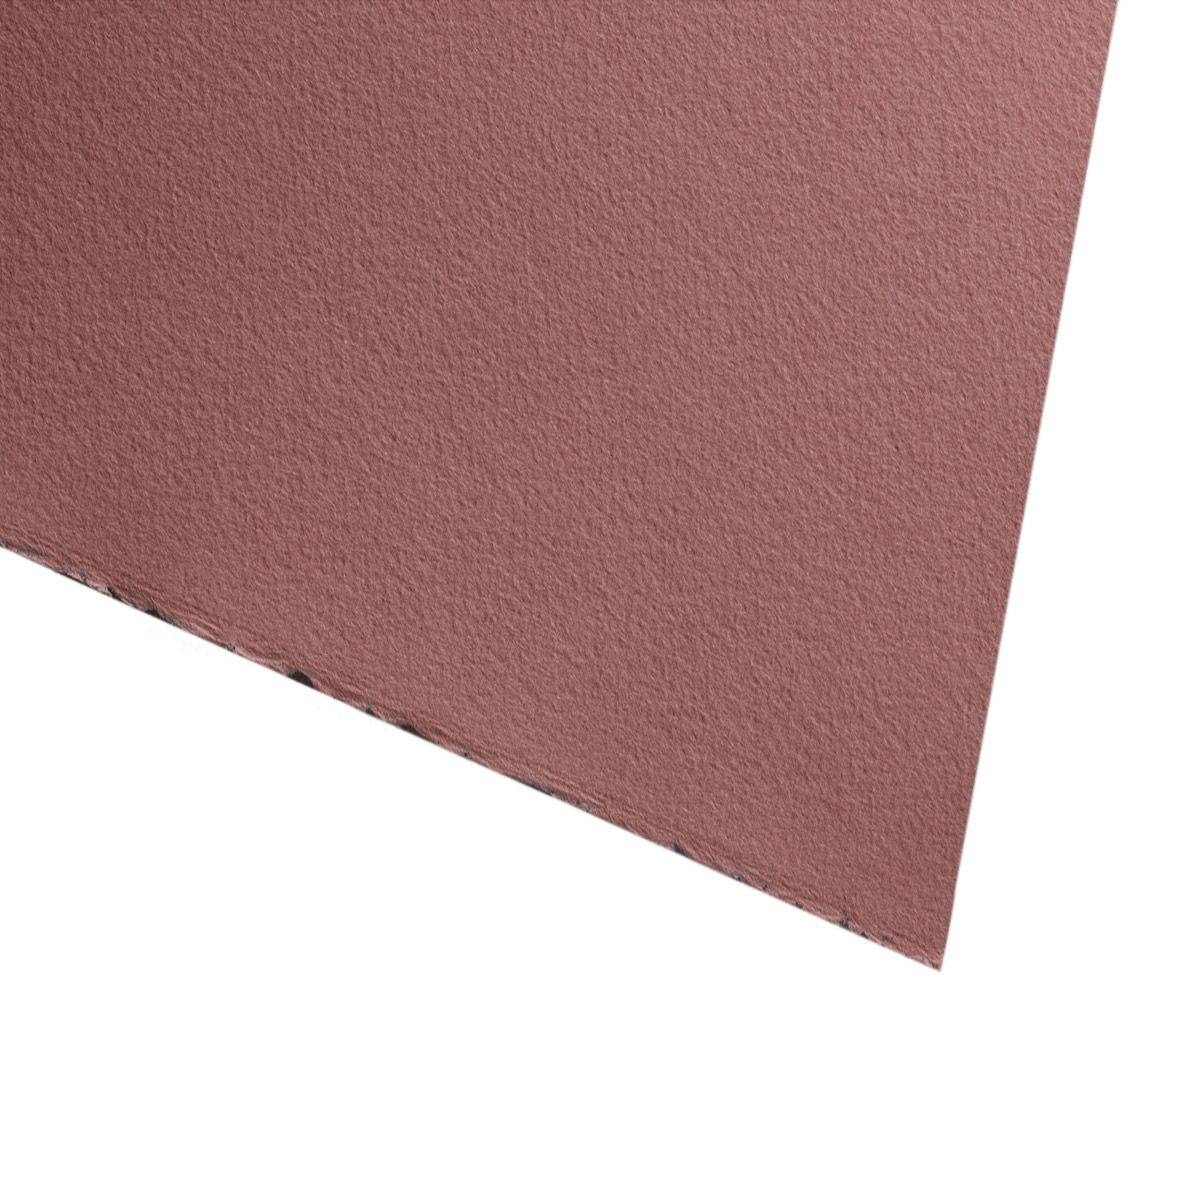 Fabriano Cromia Paper Sheet Pale Brown 19.6" x 25.5"